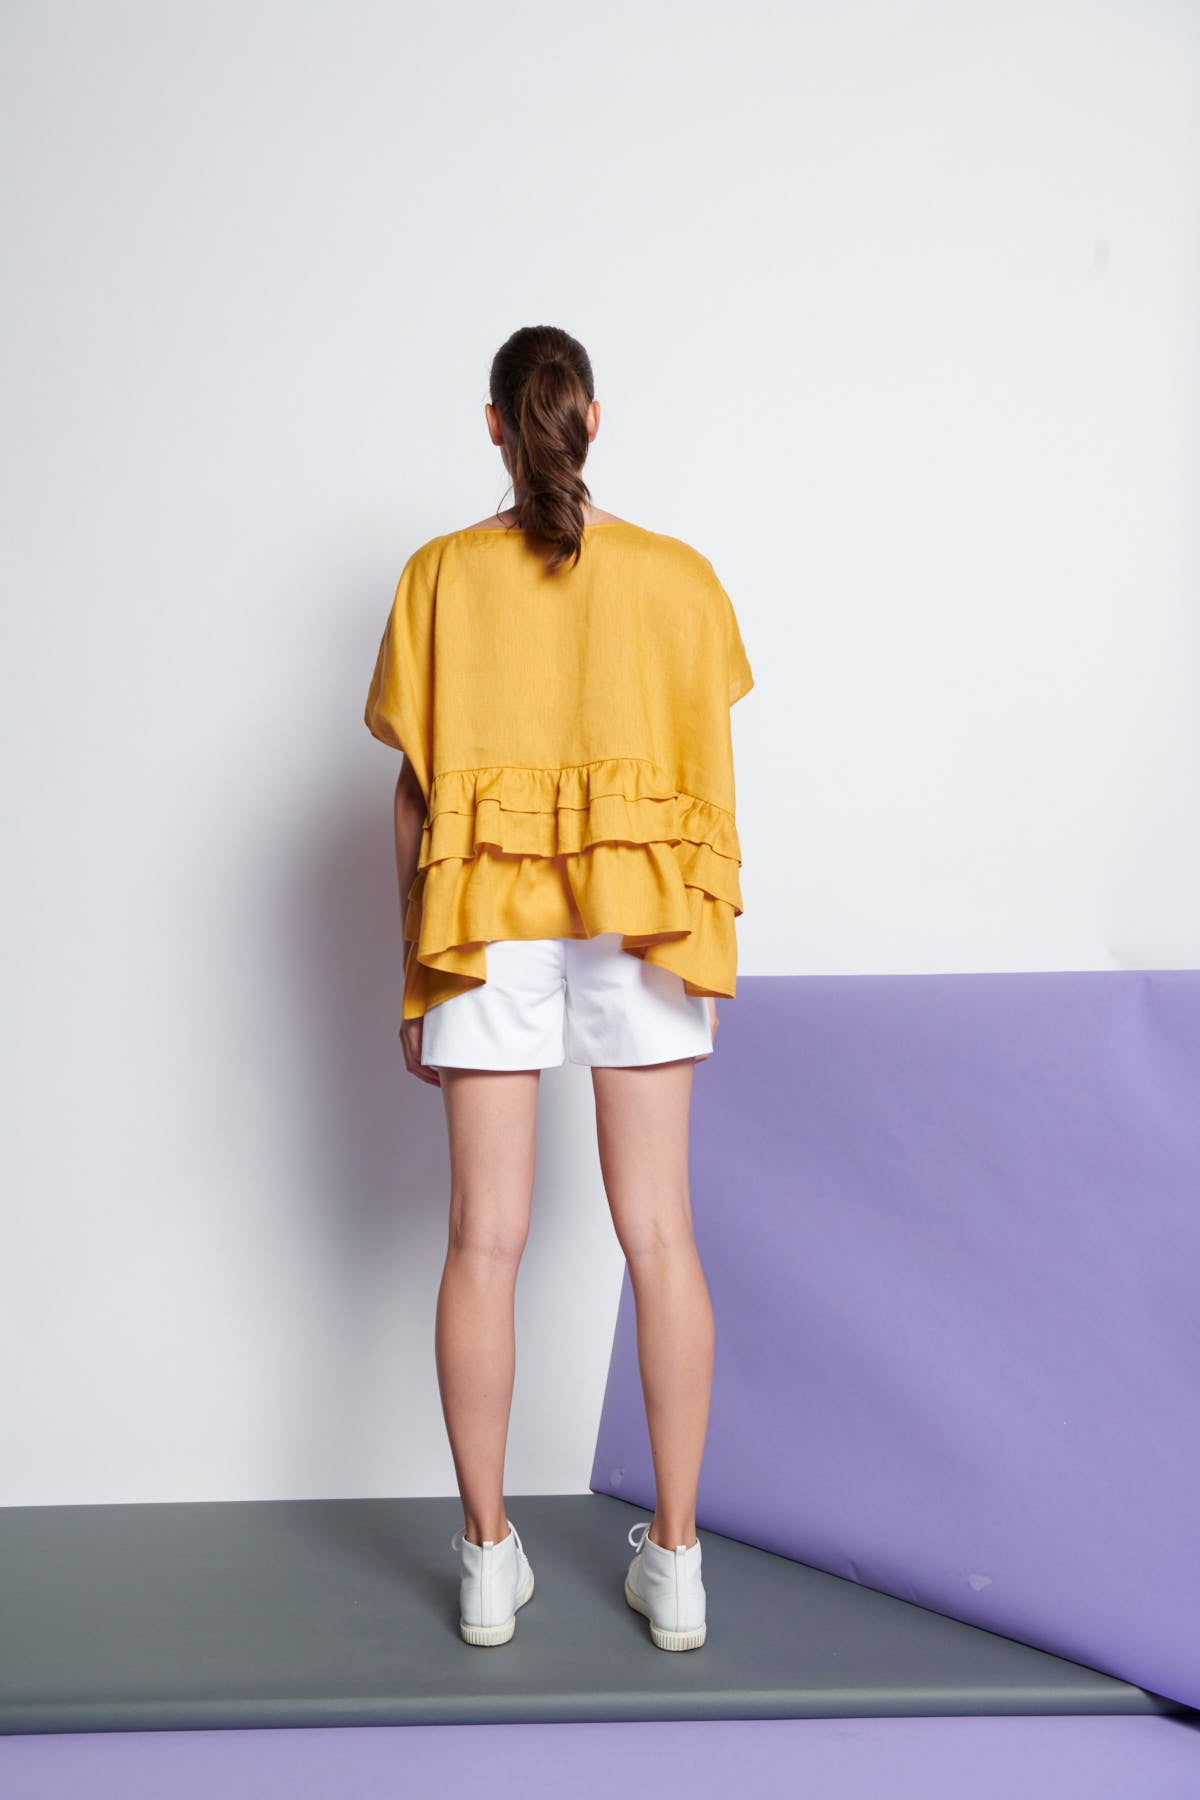 An easy-fit, tiered ruffle linen top with round neckline and short sleeves in yellow